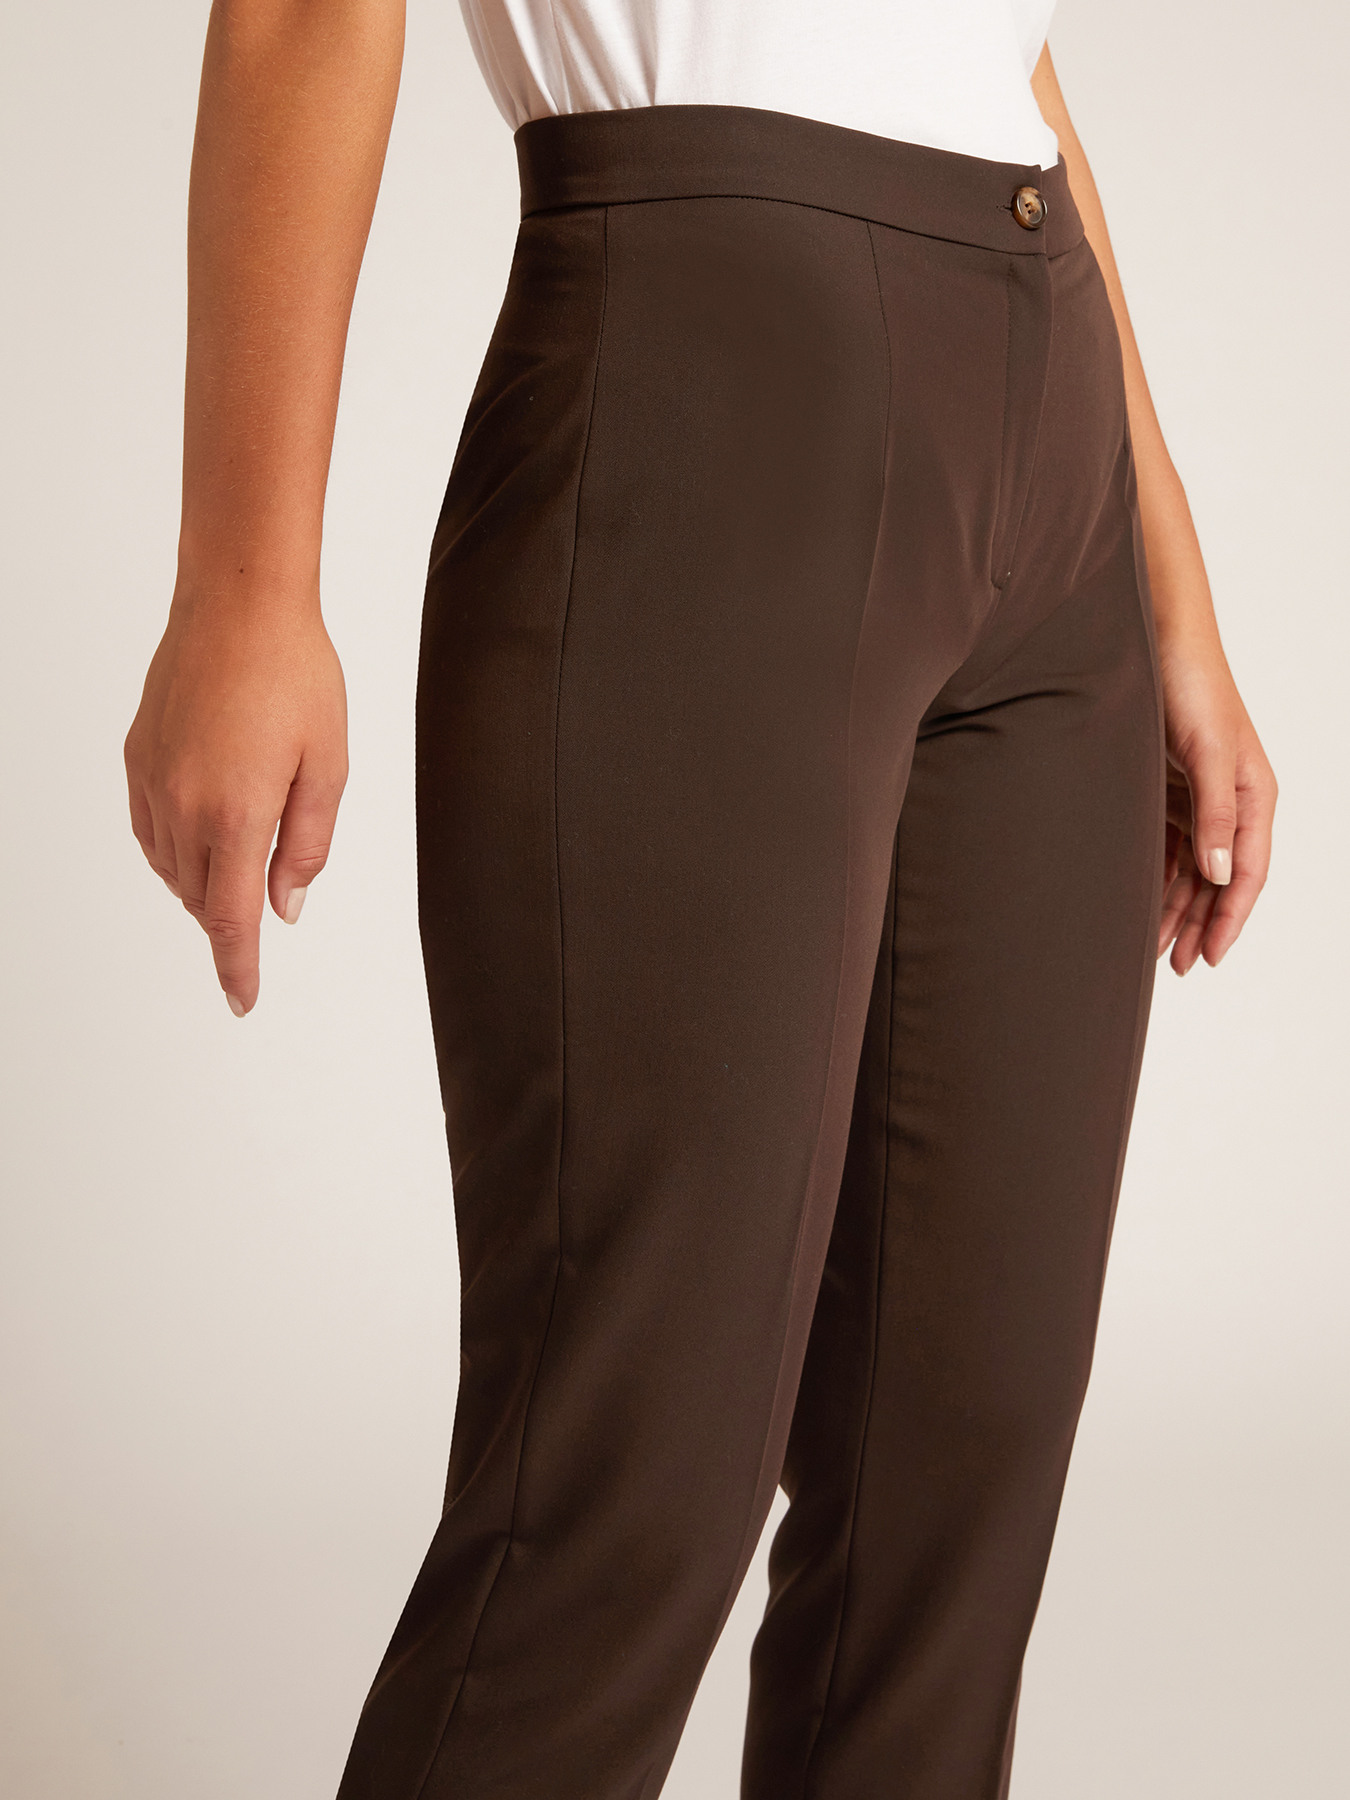 Women's Duluth Reserve Stovepipe Pants | Duluth Trading Company